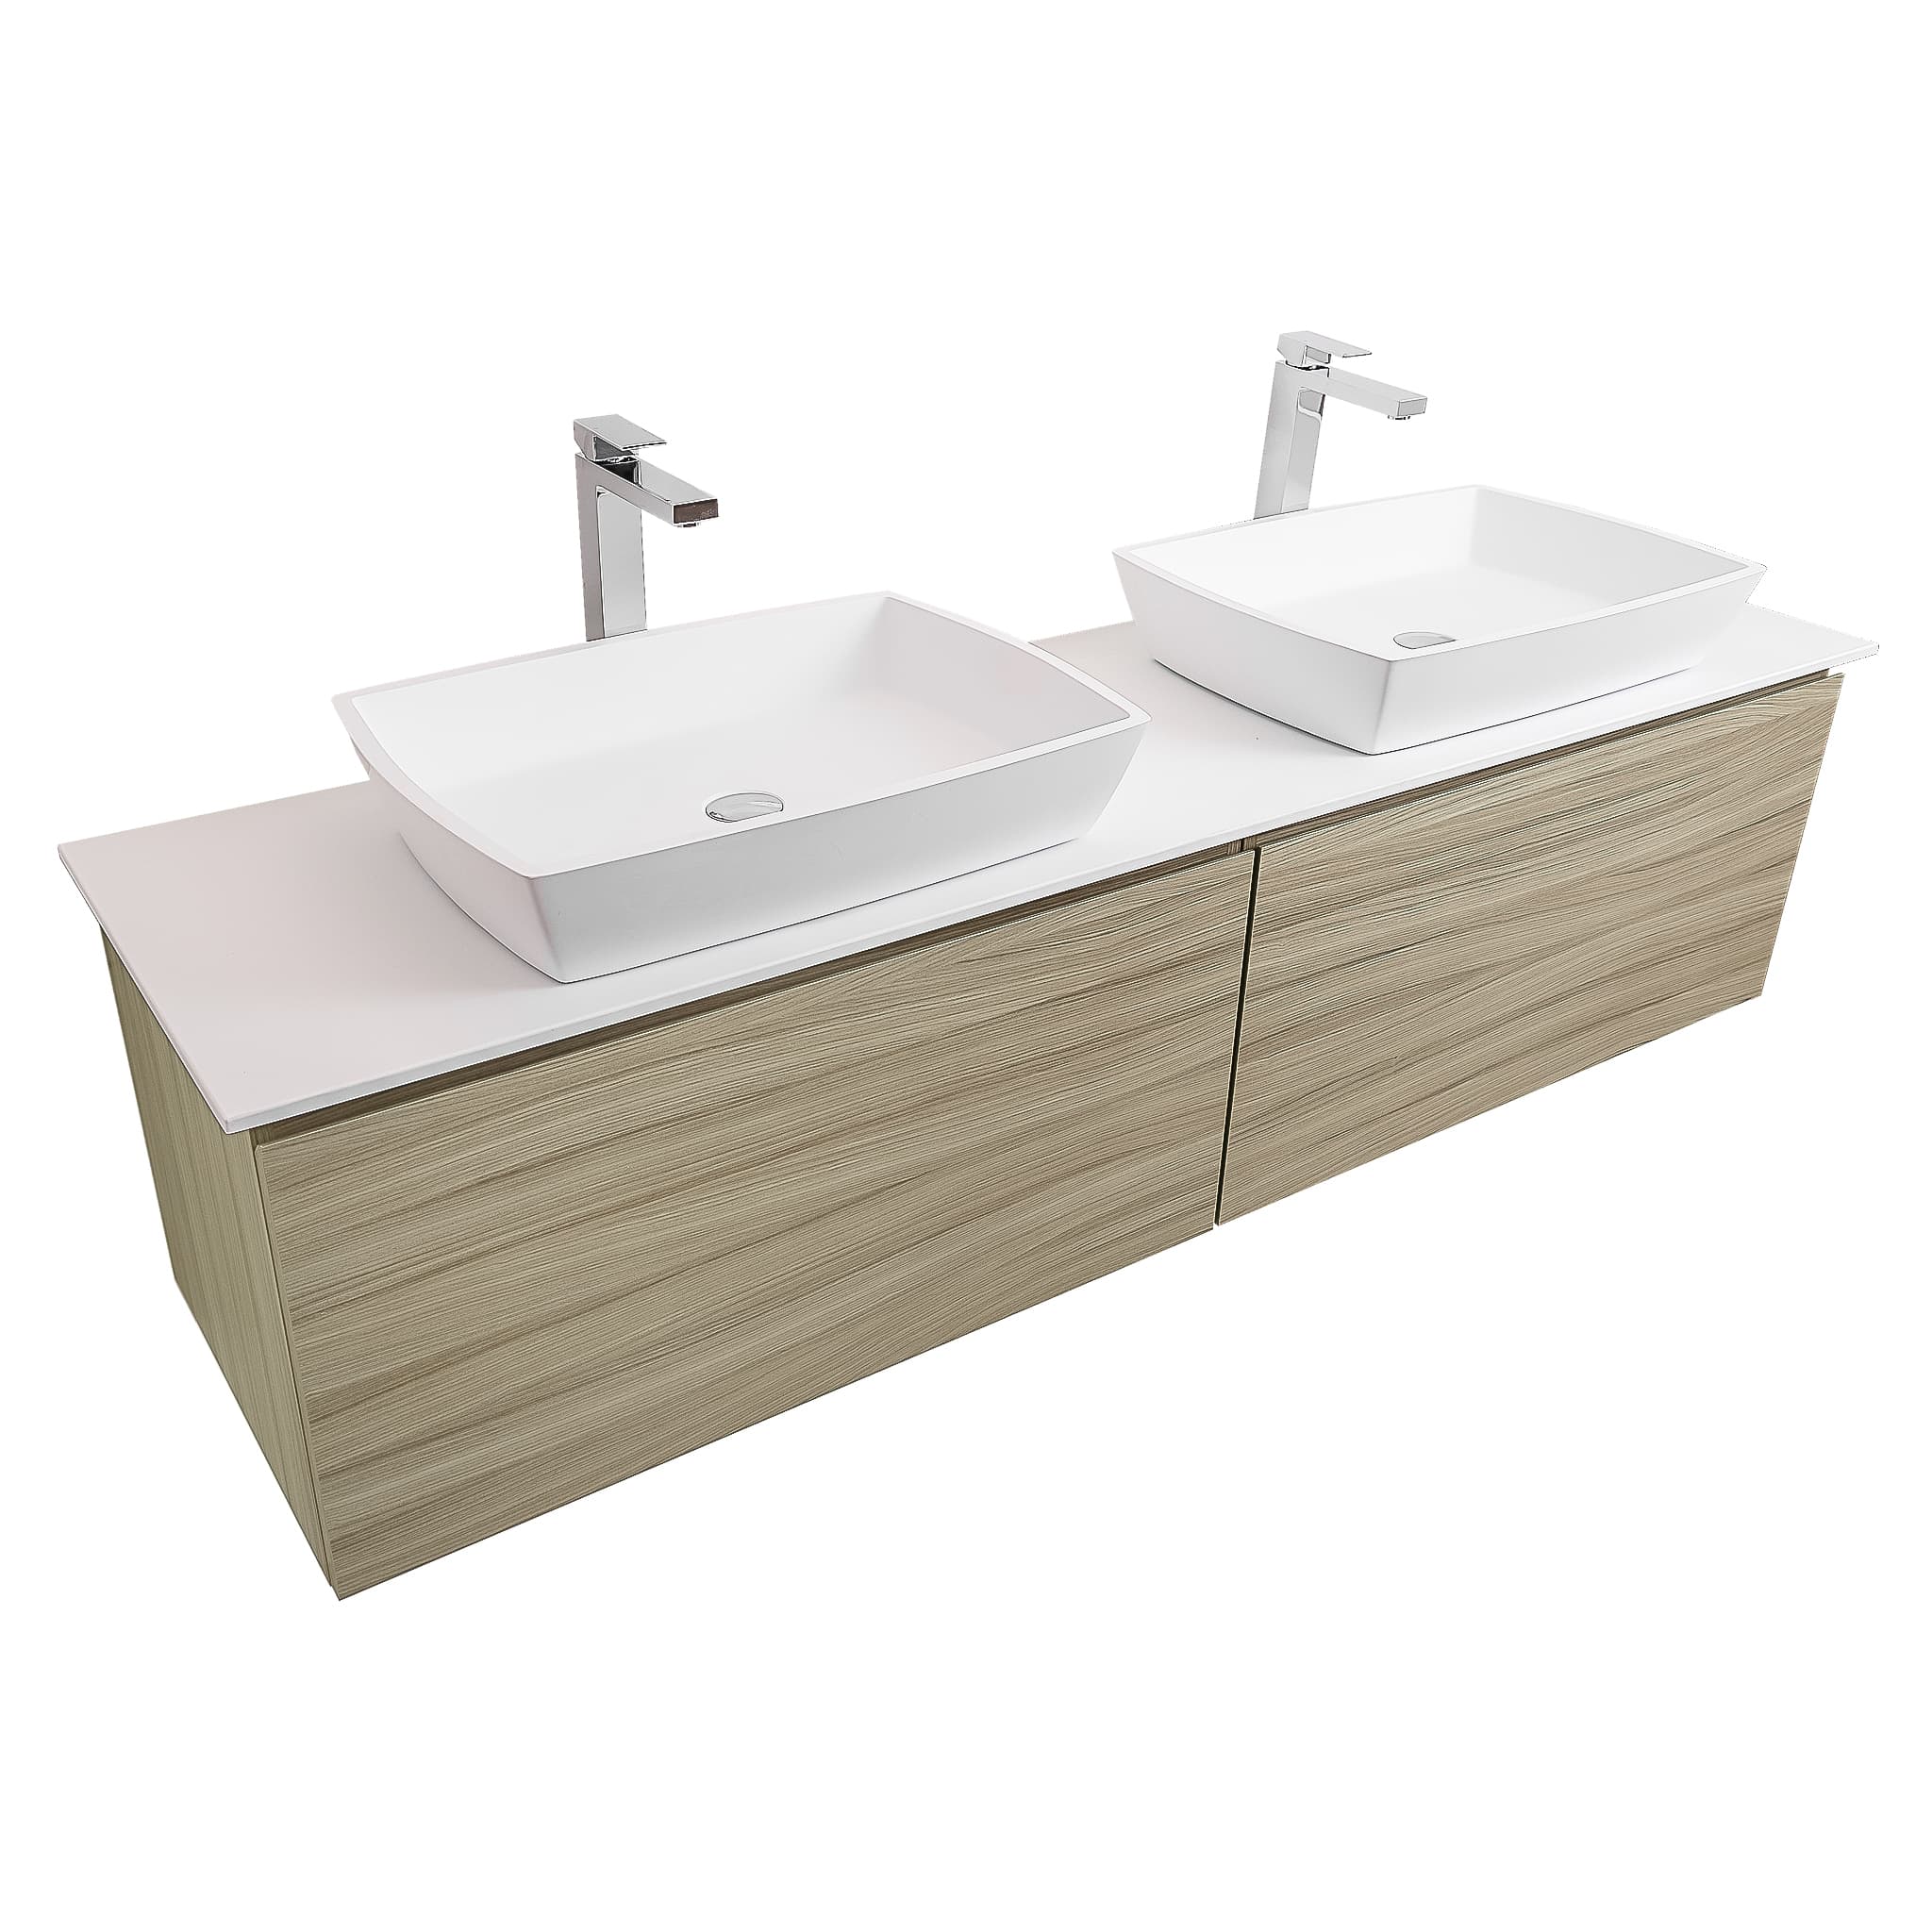 Venice 63 Nilo Grey Wood Texture Cabinet, Solid Surface Flat White Counter And Two Square Solid Surface White Basin 1316, Wall Mounted Modern Vanity Set